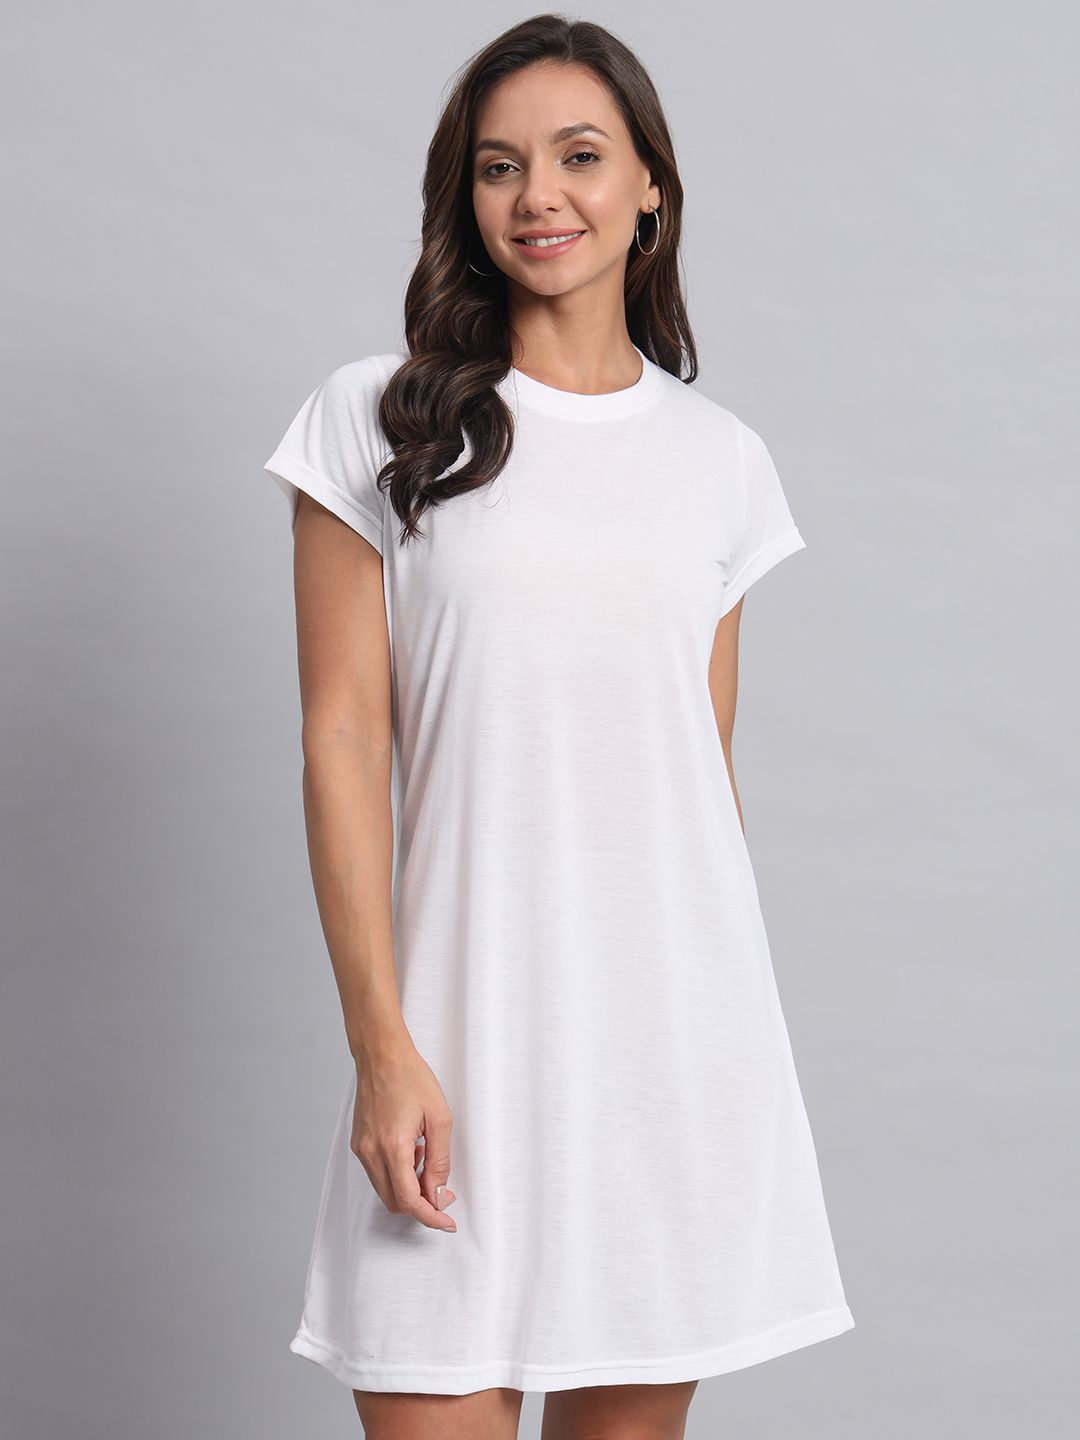     			OBAAN Cotton Blend Solid Above Knee Women's T-shirt Dress - White ( Pack of 1 )